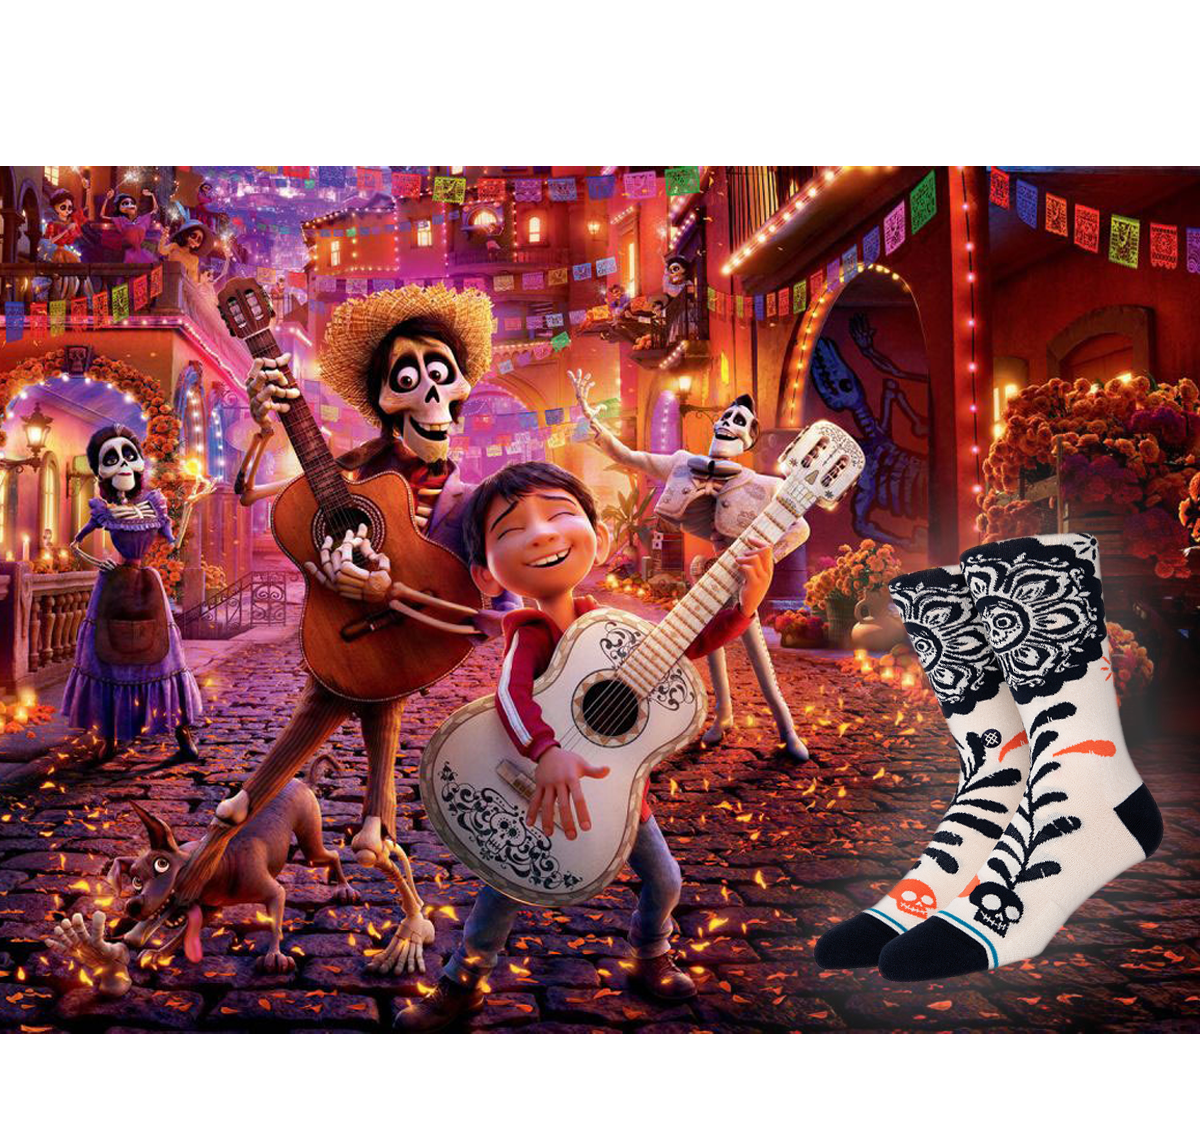 Stance Planted - Pixar Coco - InfiKnit - Canvas mood